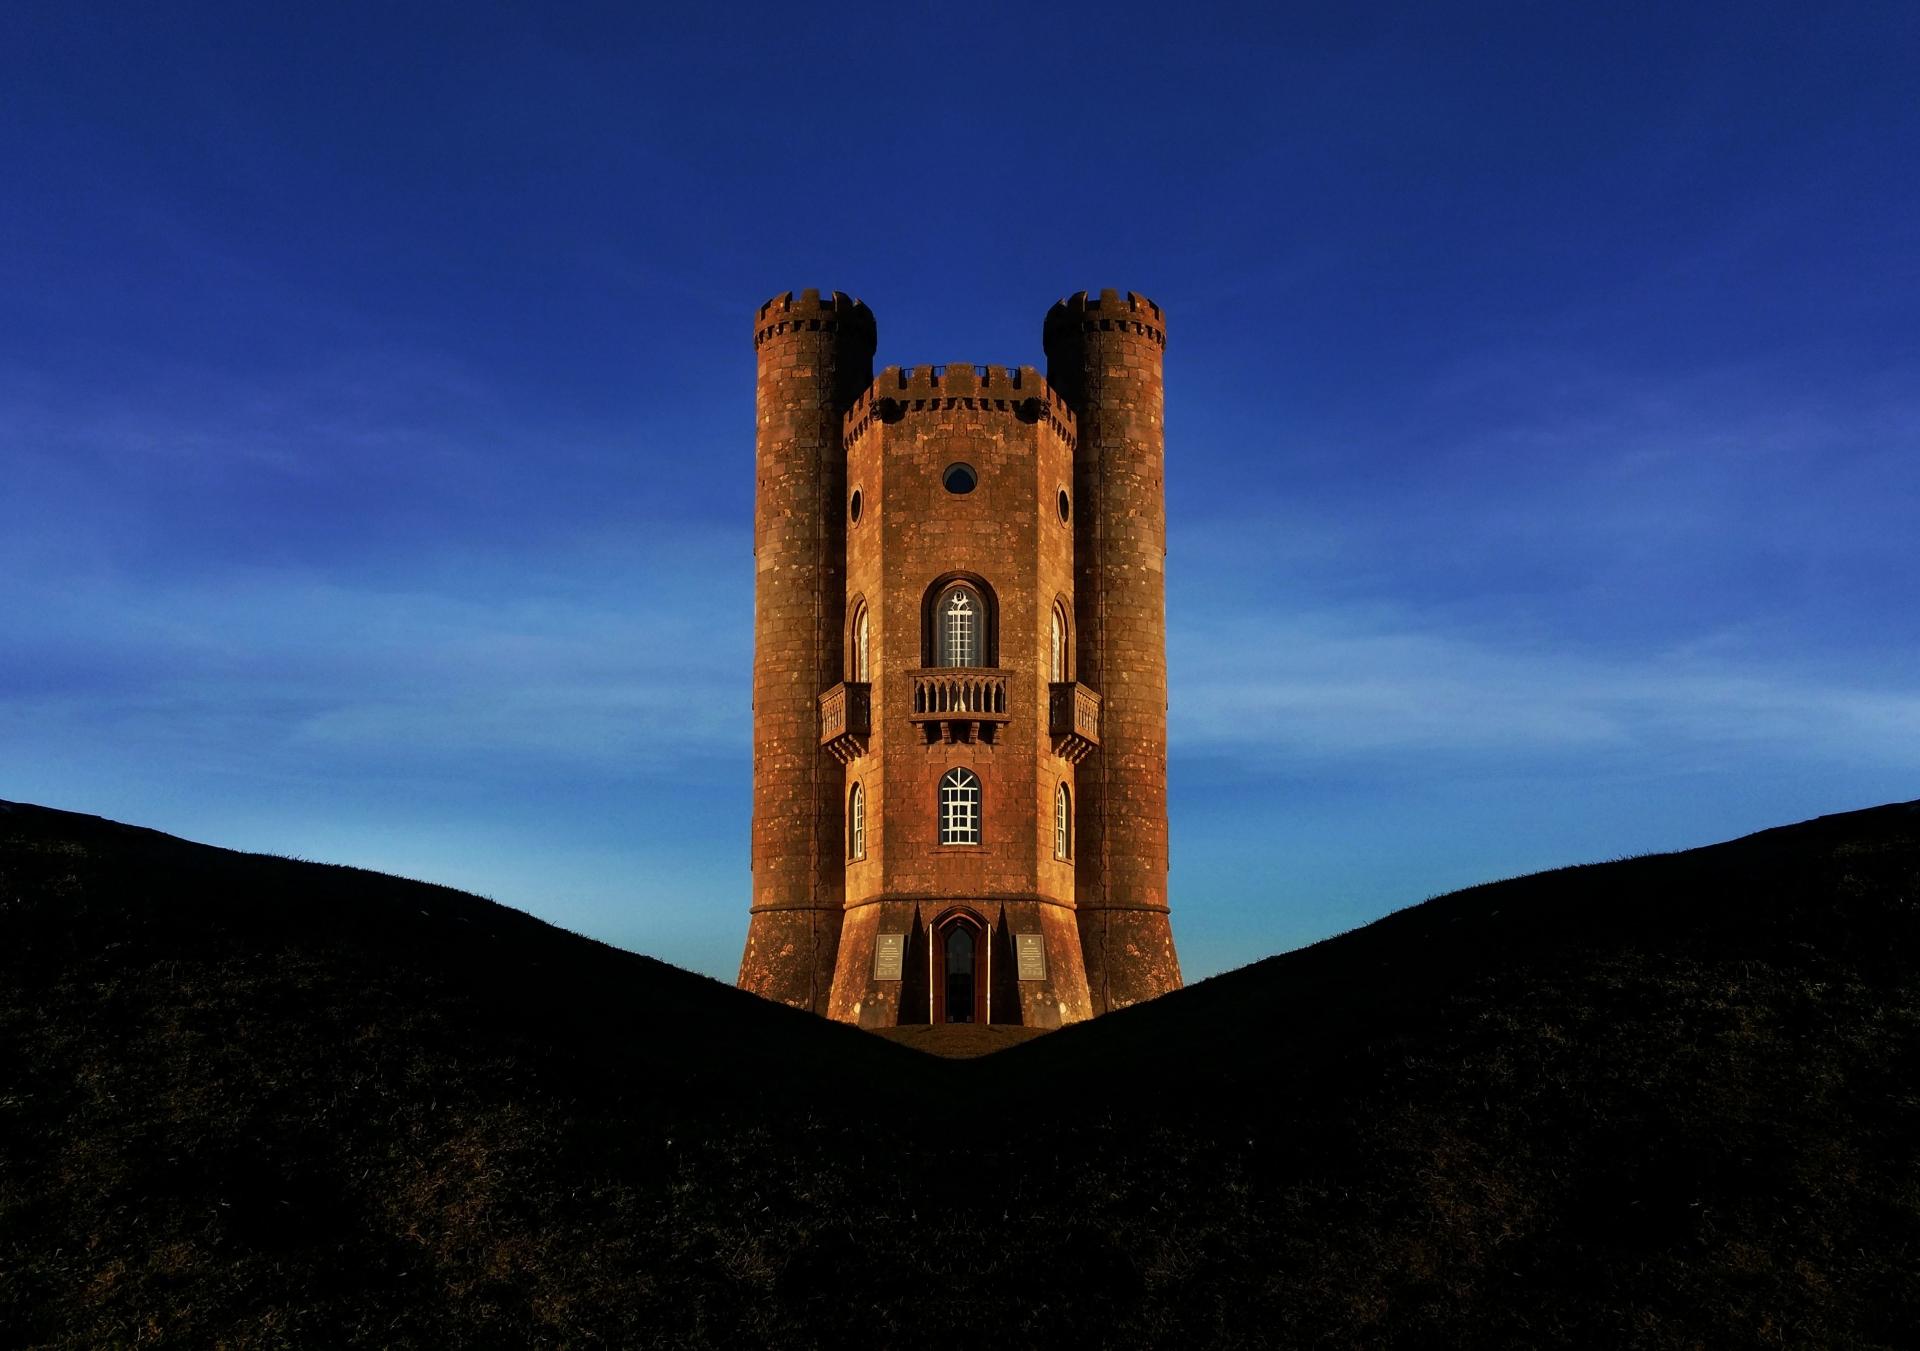 Broadway Tower Worcestershire Wallpaper And Background Image